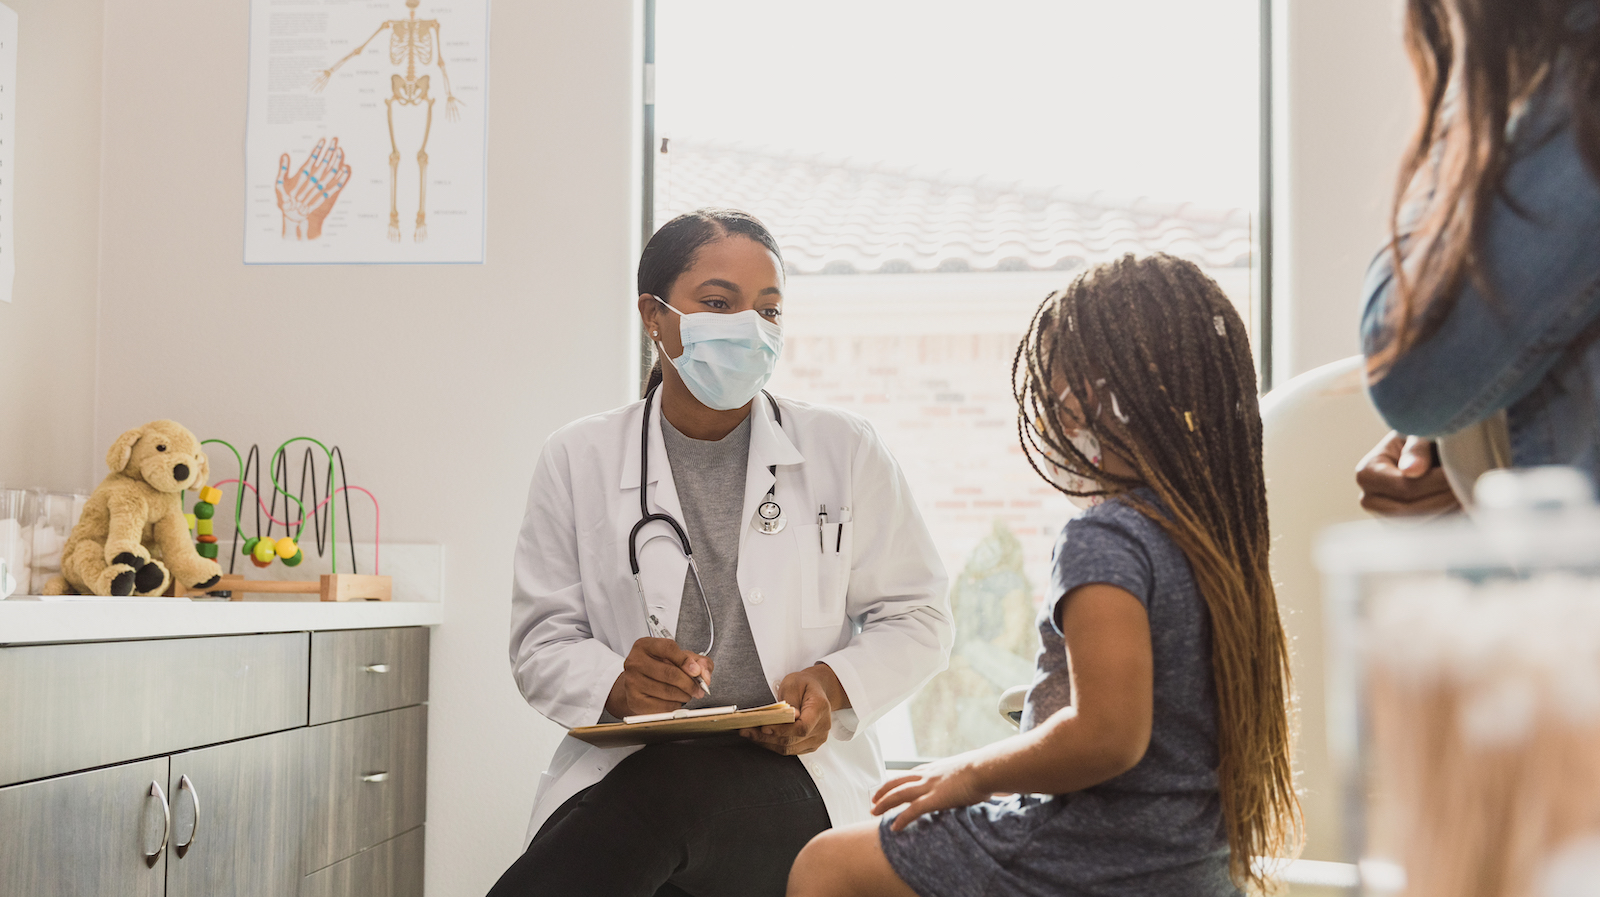 Pediatricians say climate conversations should be part of any doctor's visit